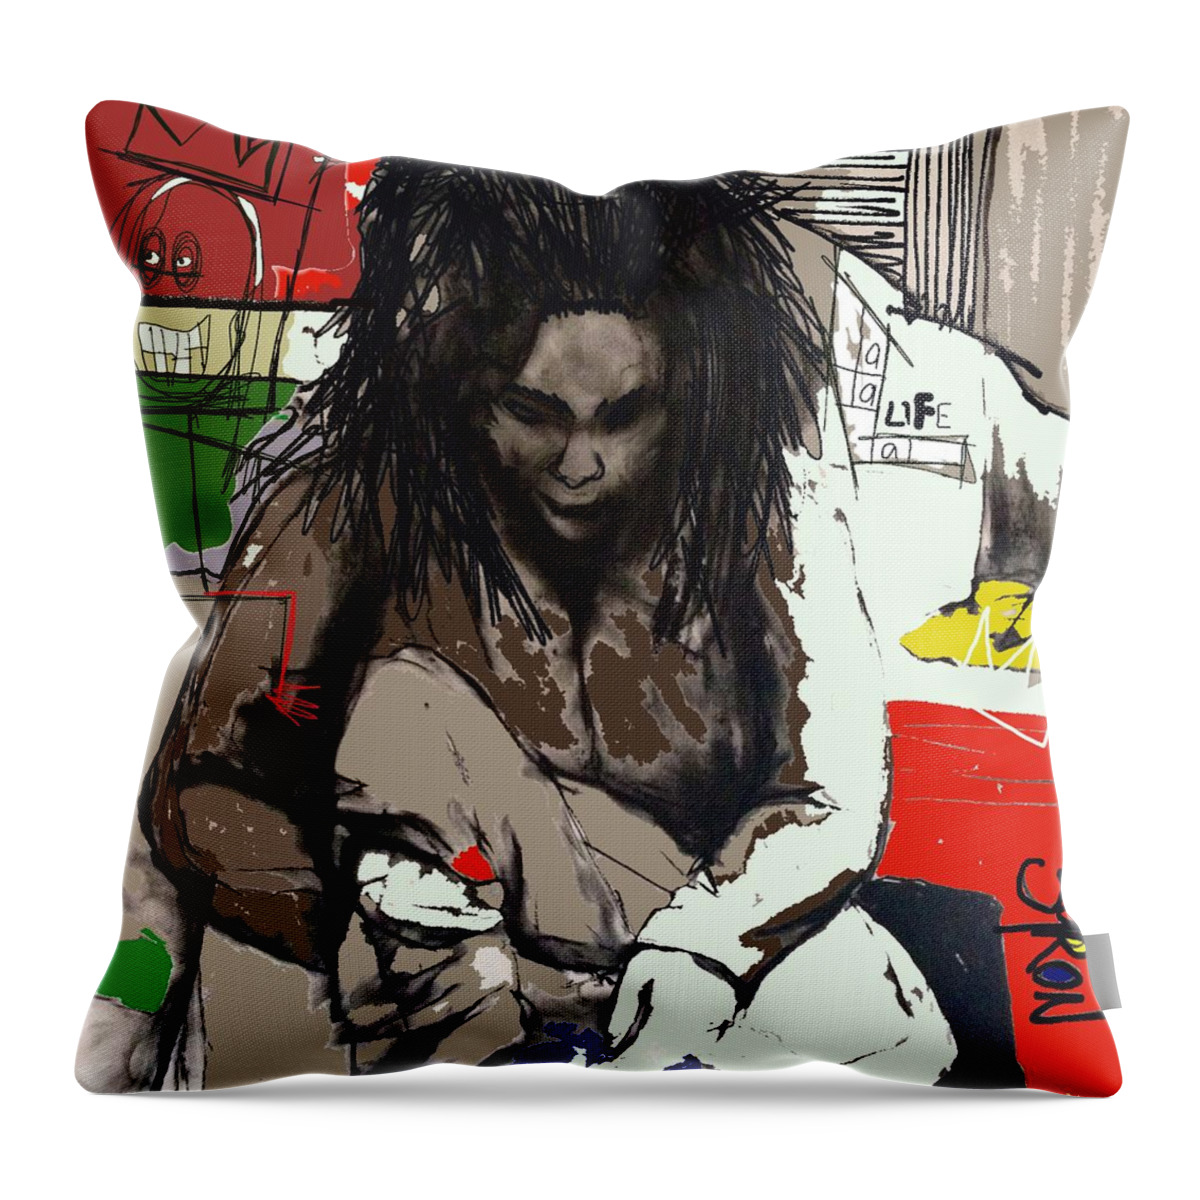 Jean Michel Throw Pillow featuring the drawing Basquiat by Helen Syron